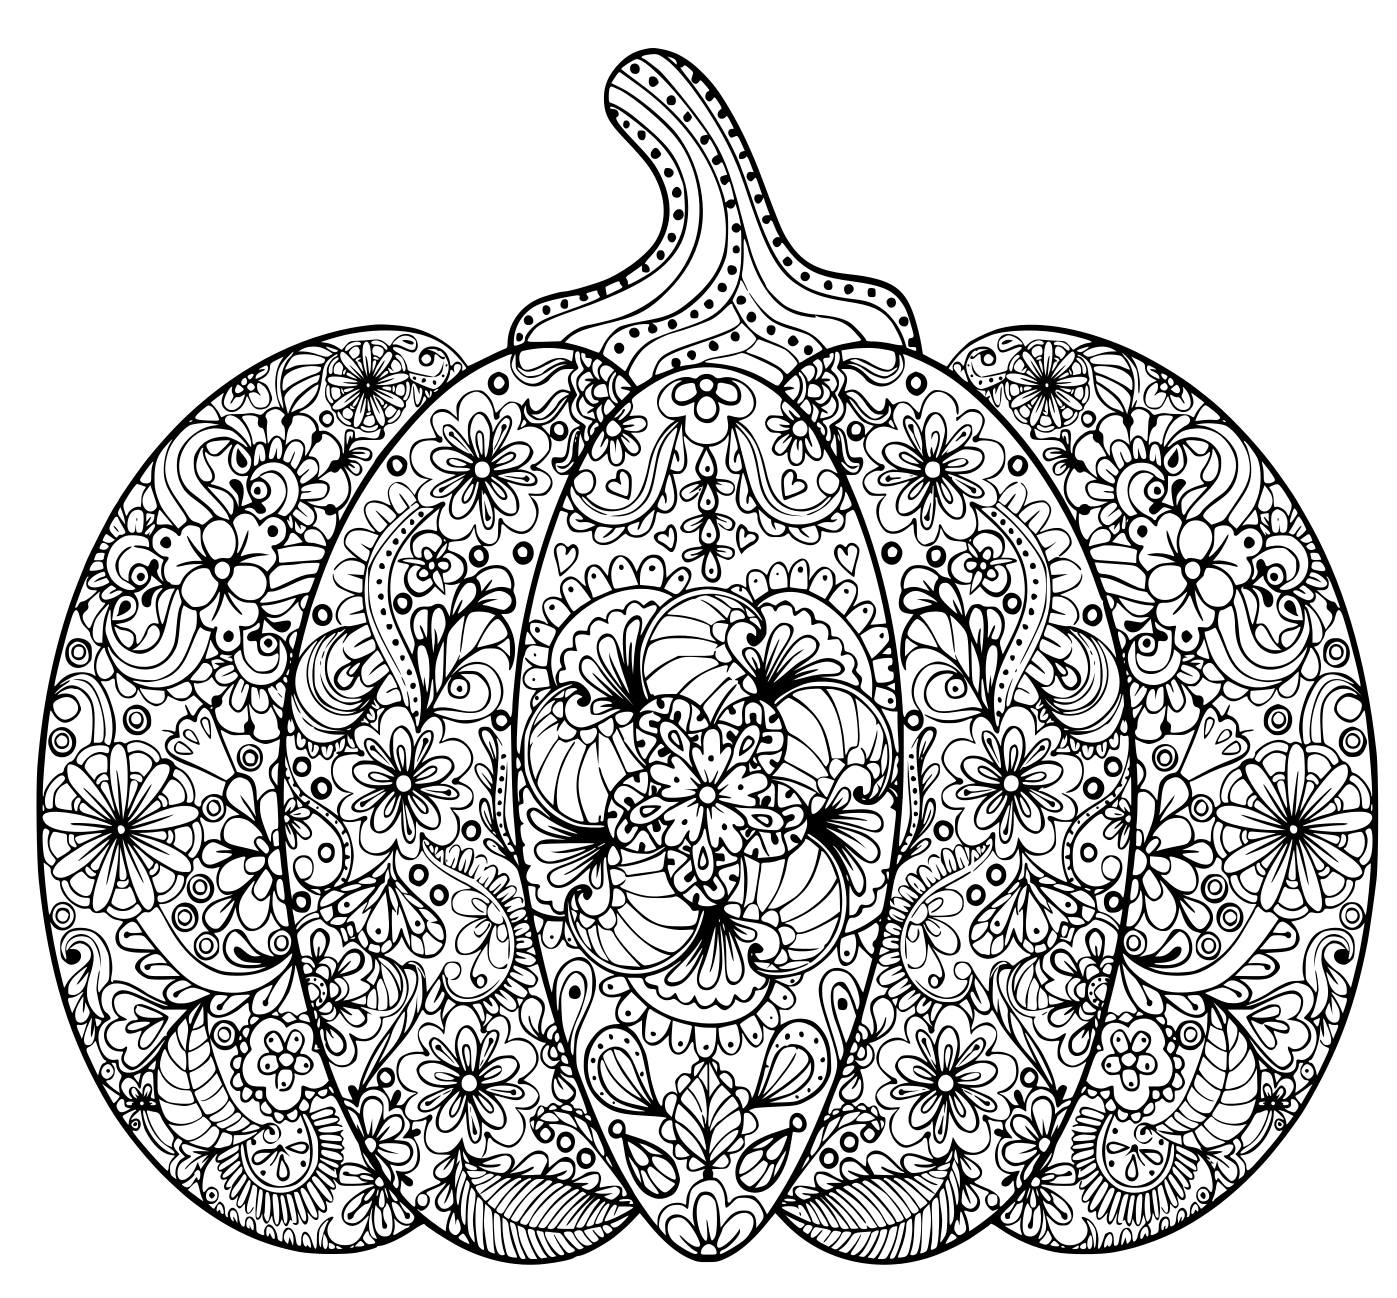 Pumpkin Illustration Hand Drawn Vegetable In Zentangle Style Tribal Totem For Tattoo Adult Coloring Page